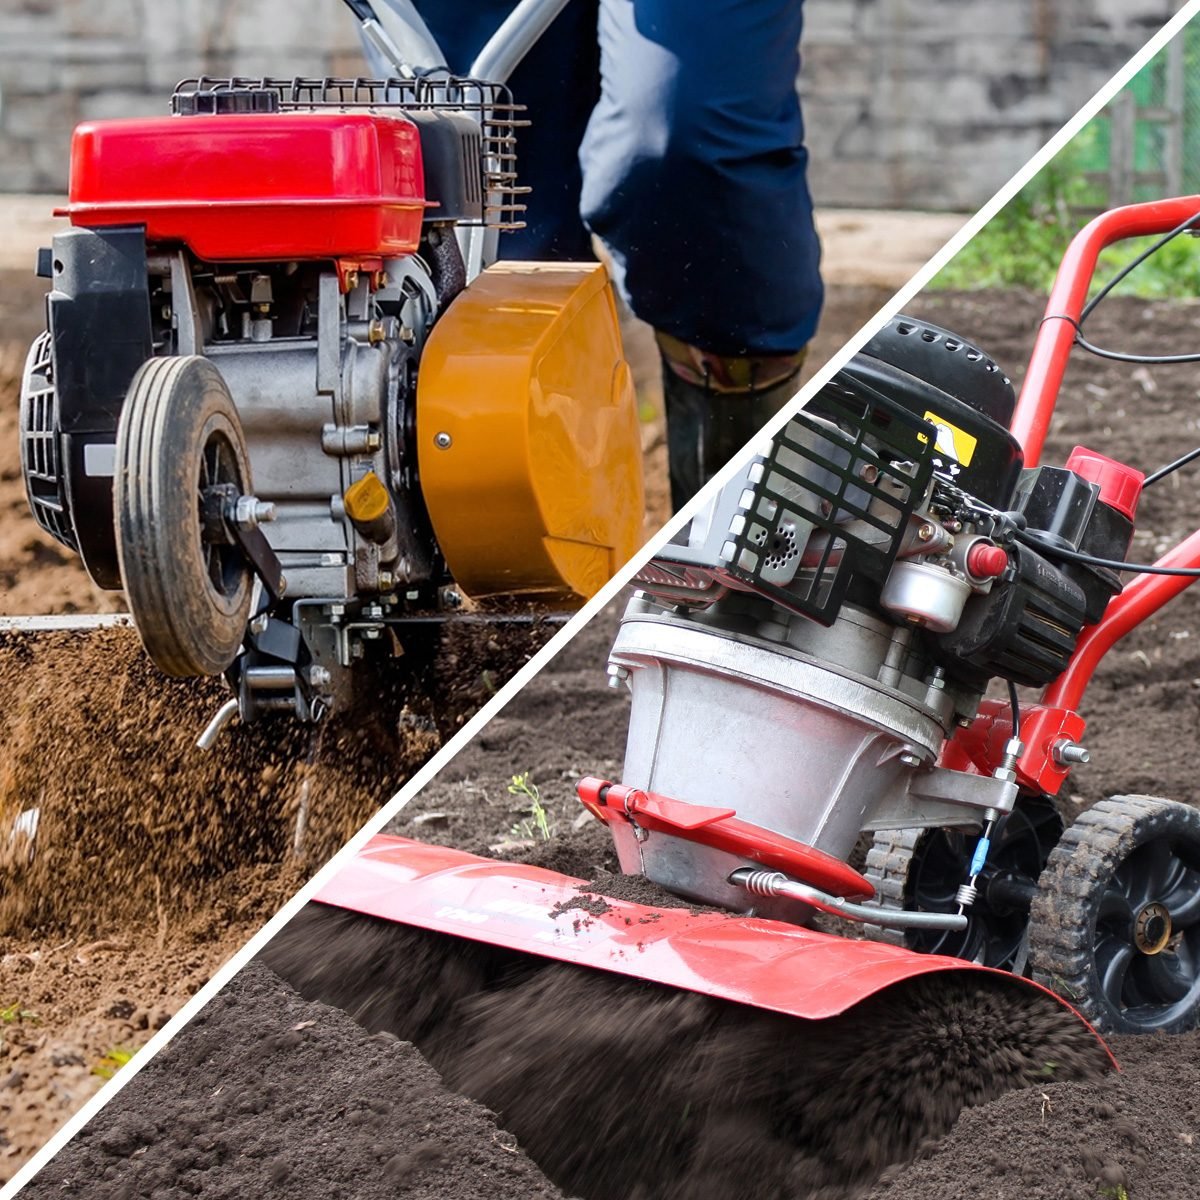 Garden Cultivator vs Tiller: What's the Difference?